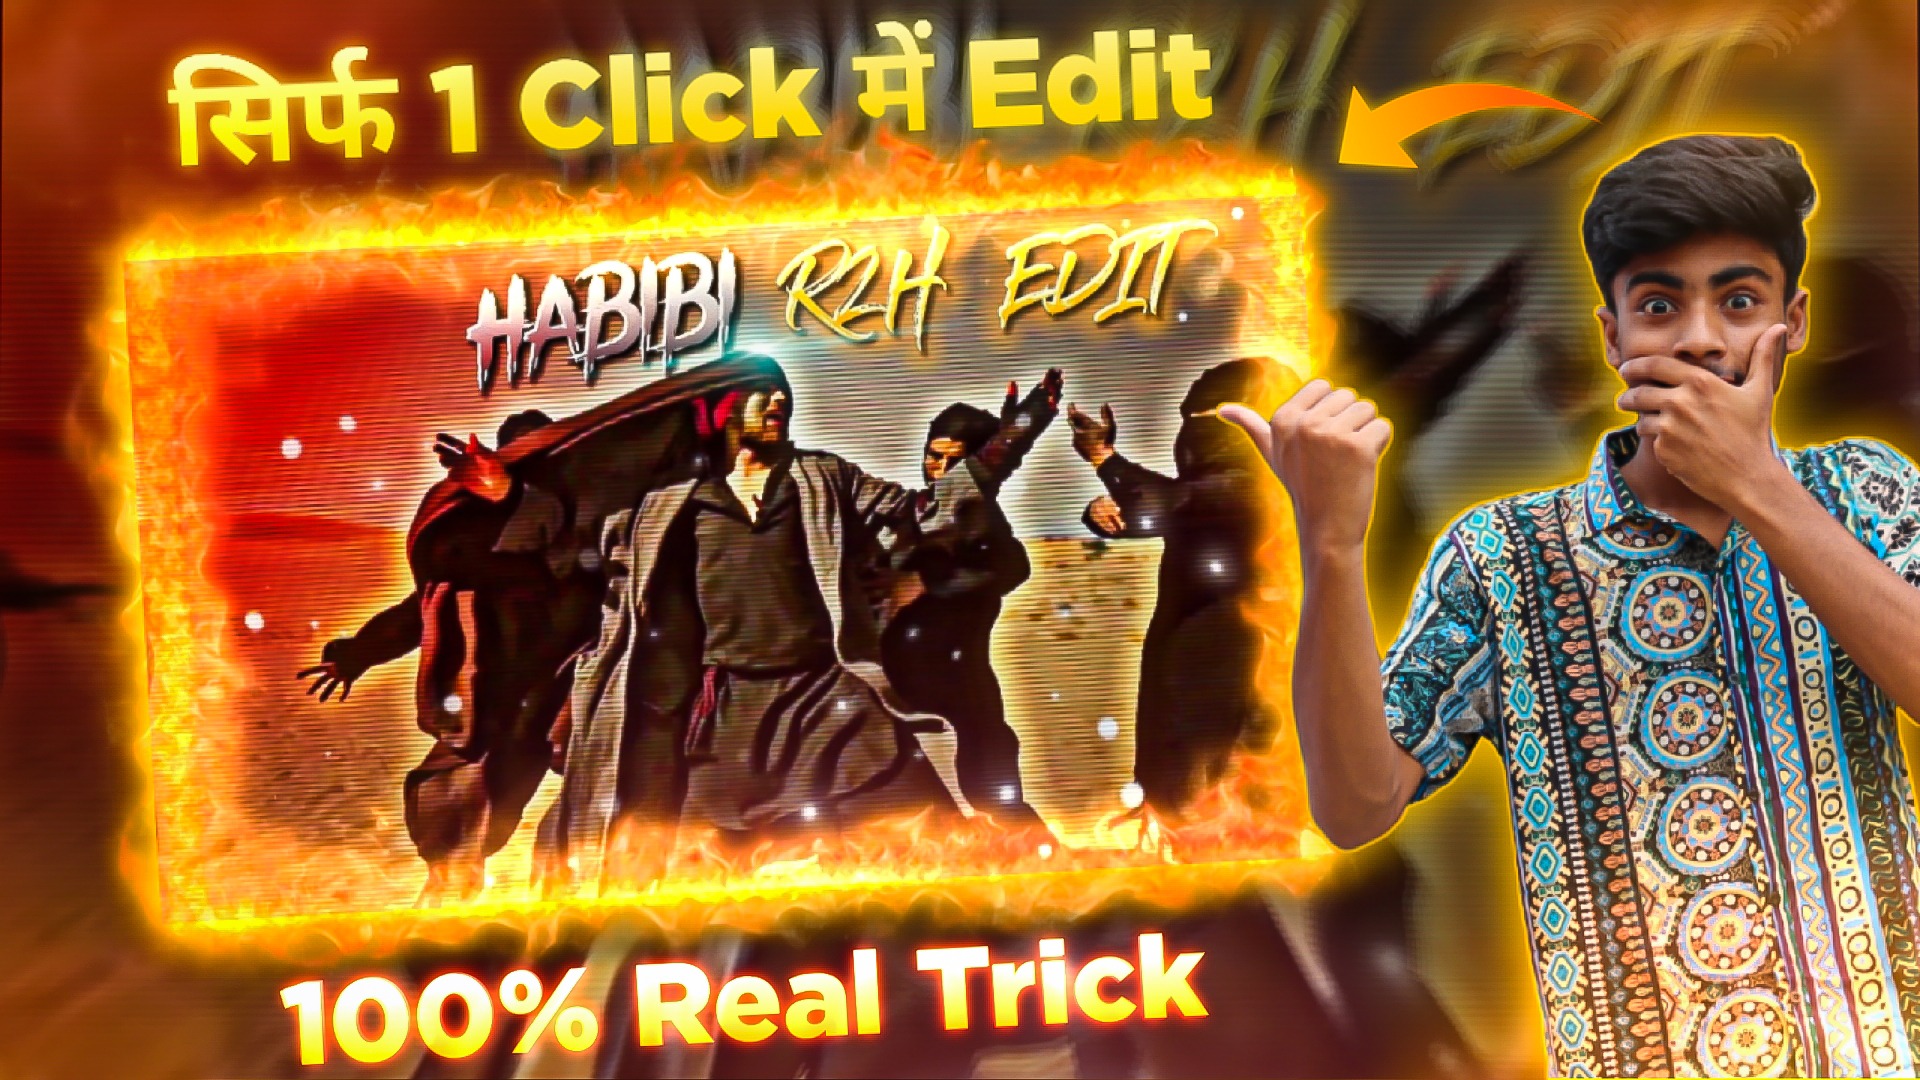 Round 2 Hell Velocity Video Editing Download All Use And Effects